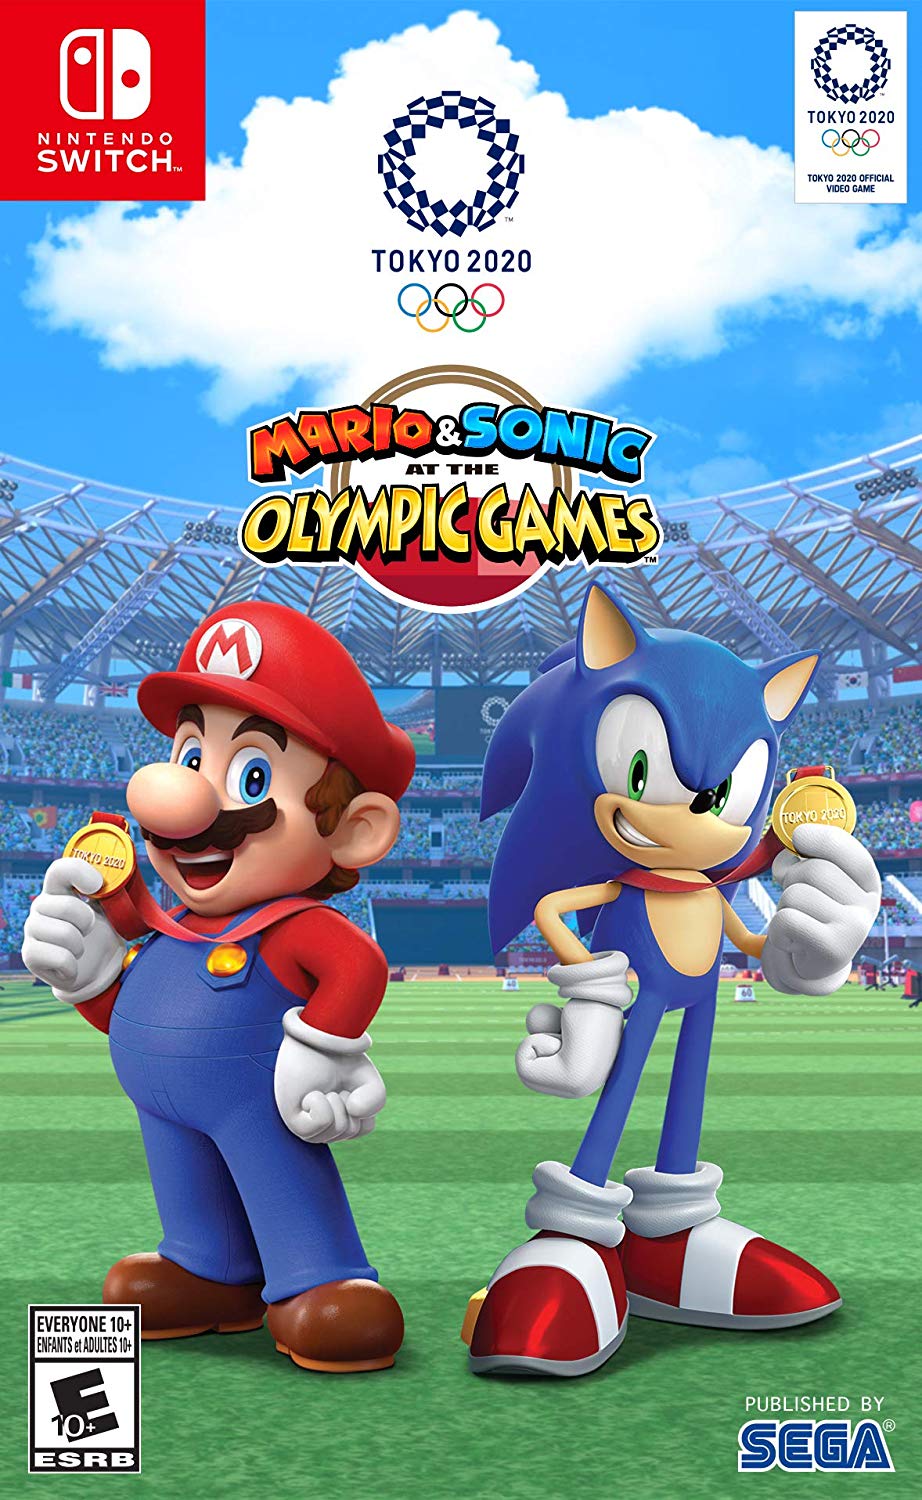 Mario & Sonic at the Olympic Games: Tokyo 2020 - Nintendo Switch - image 1 of 8